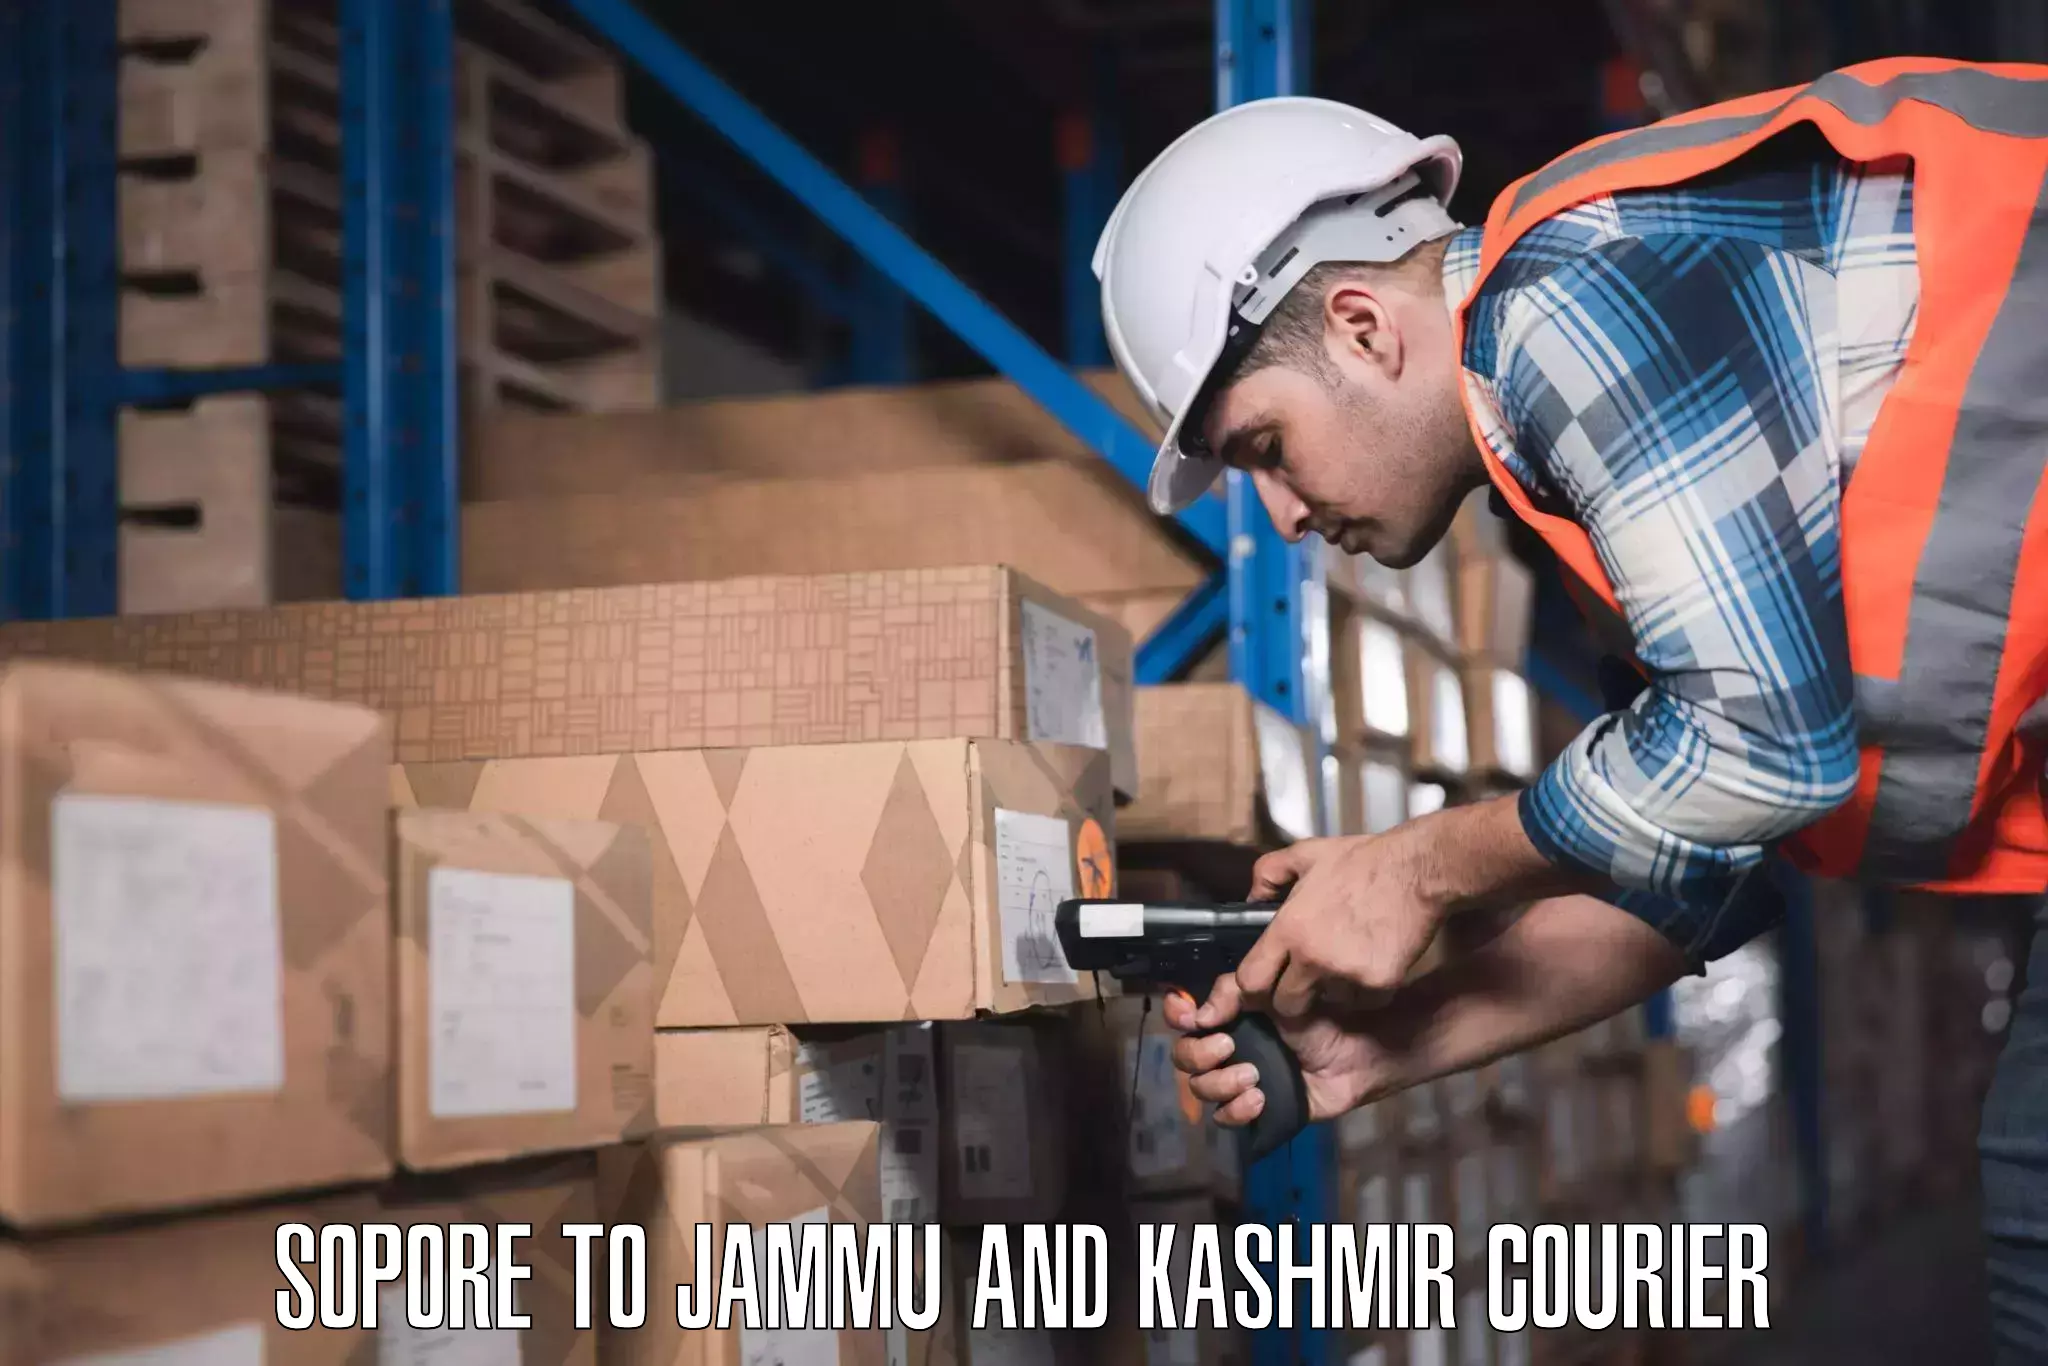 Luggage transport company Sopore to Jammu and Kashmir